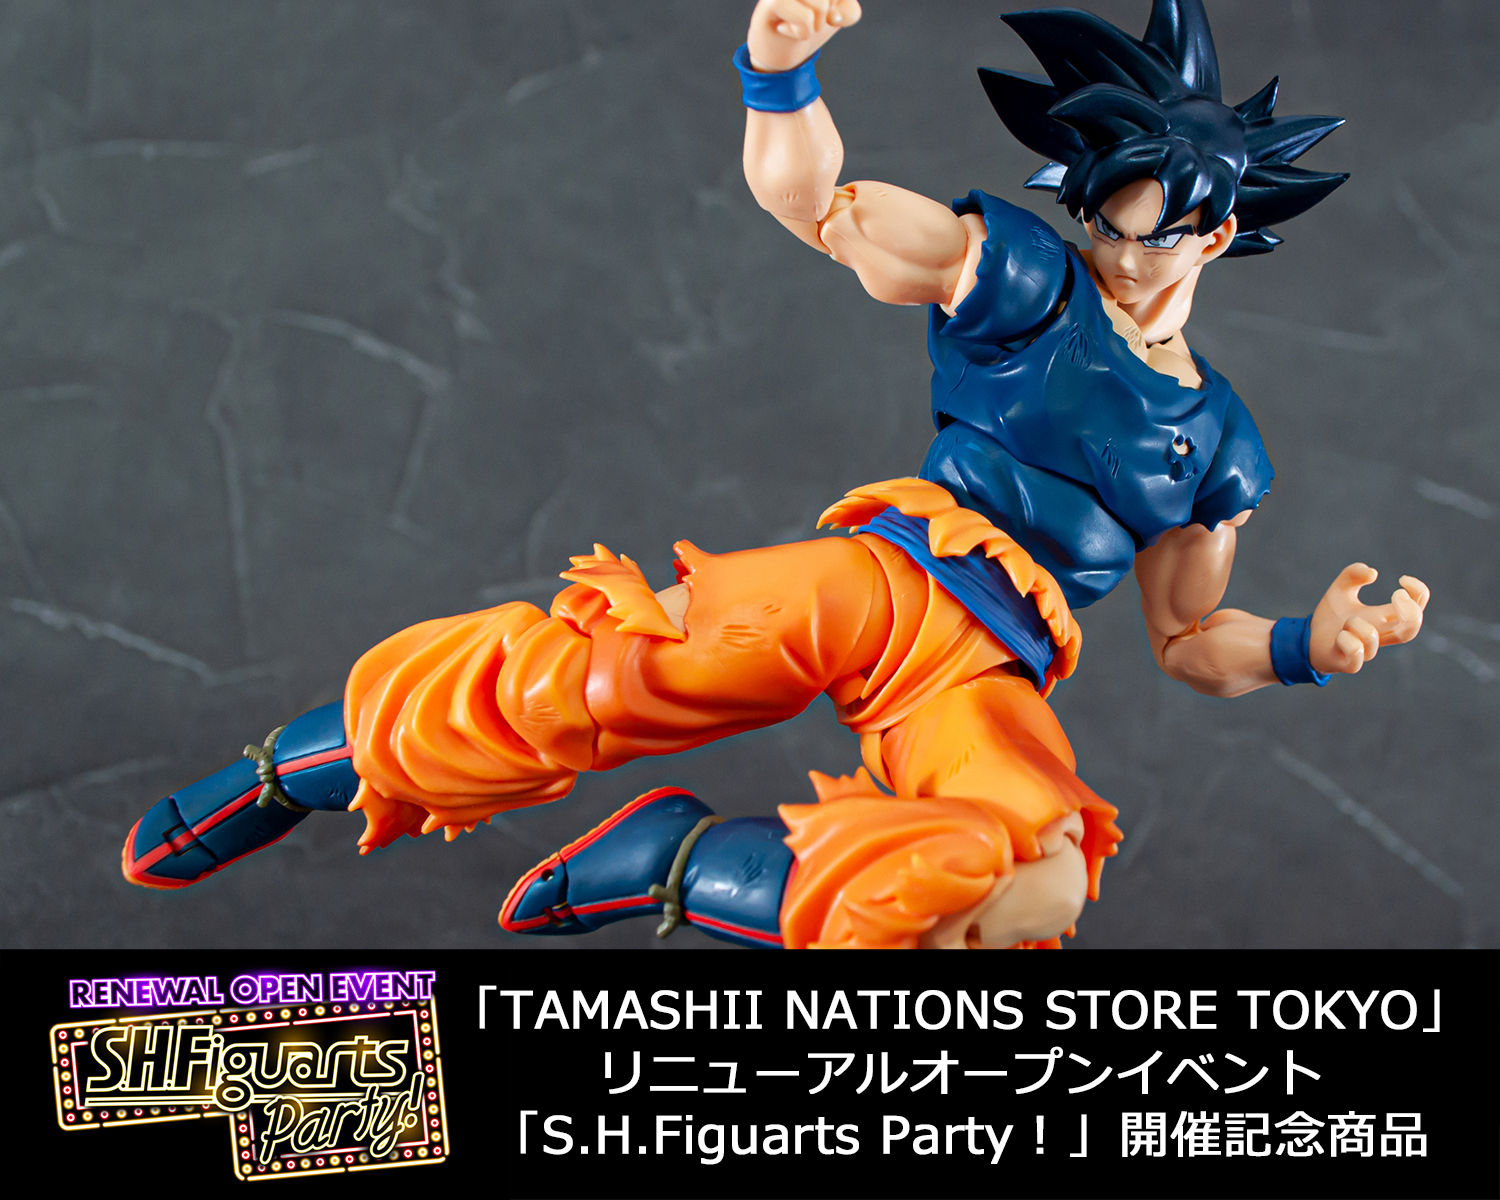 Commemorative products for the "TAMASHII NATIONS STORE TOKYO" re-opening event "S.H.Figuarts Party!